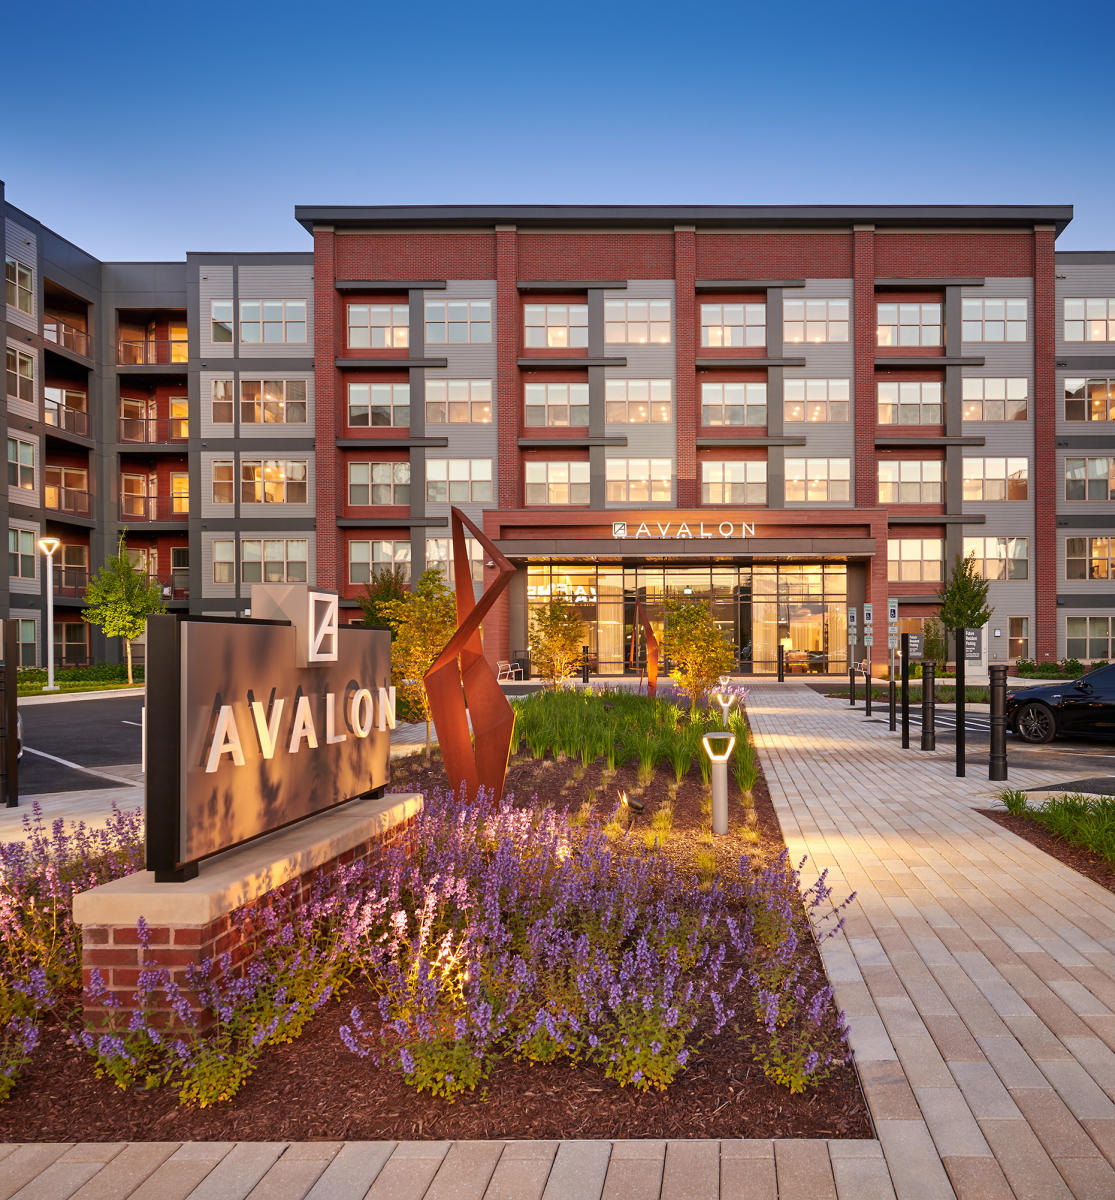 Developer: Avalon Bay Communities | Project: Foundry Row, Owings Mills MD